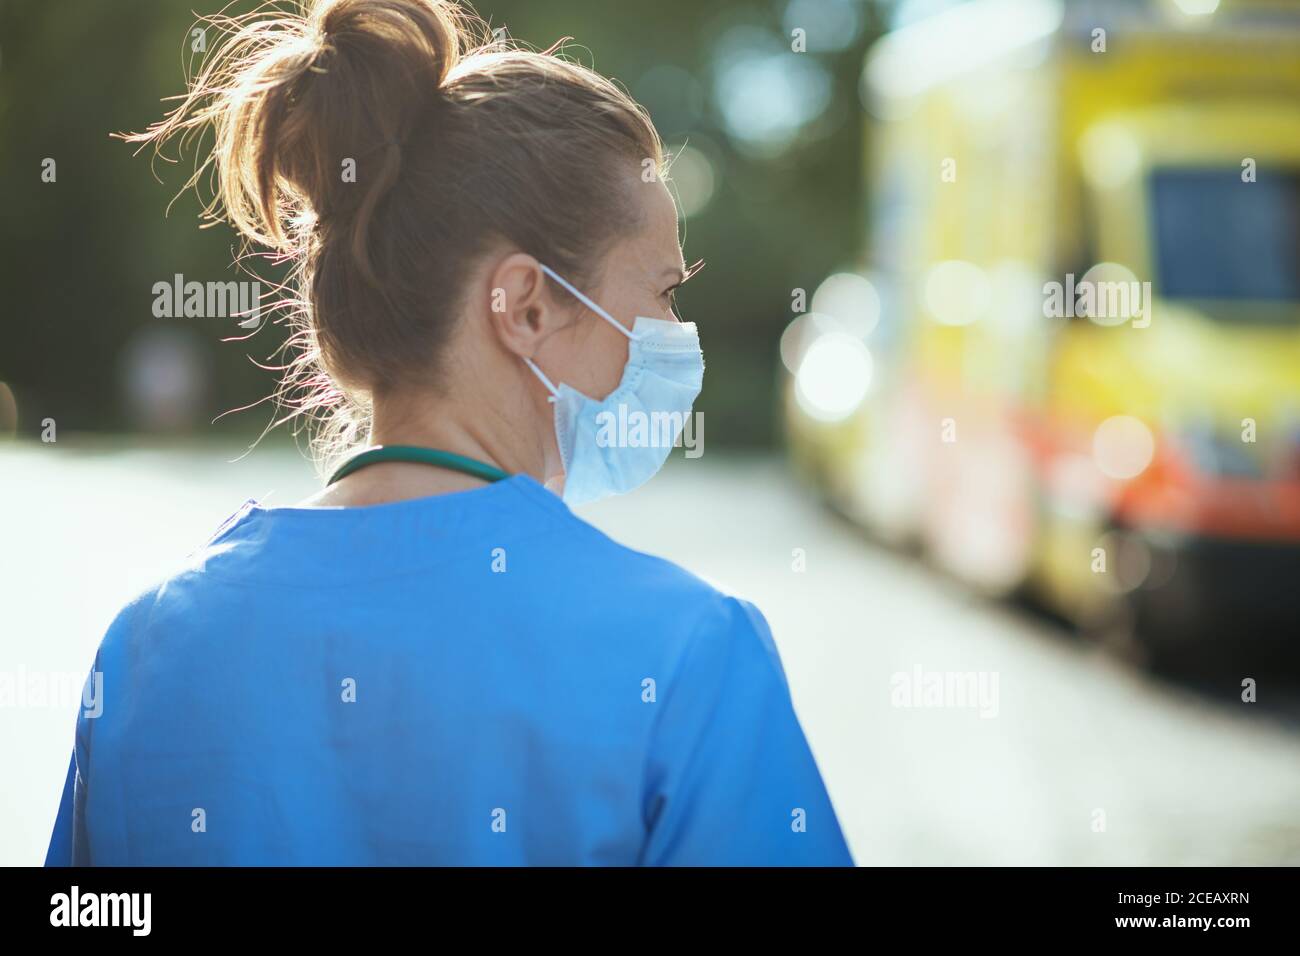 covid-19 pandemic. Seen from behind paramedic woman in uniform with medical mask outdoors near ambulance. Stock Photo